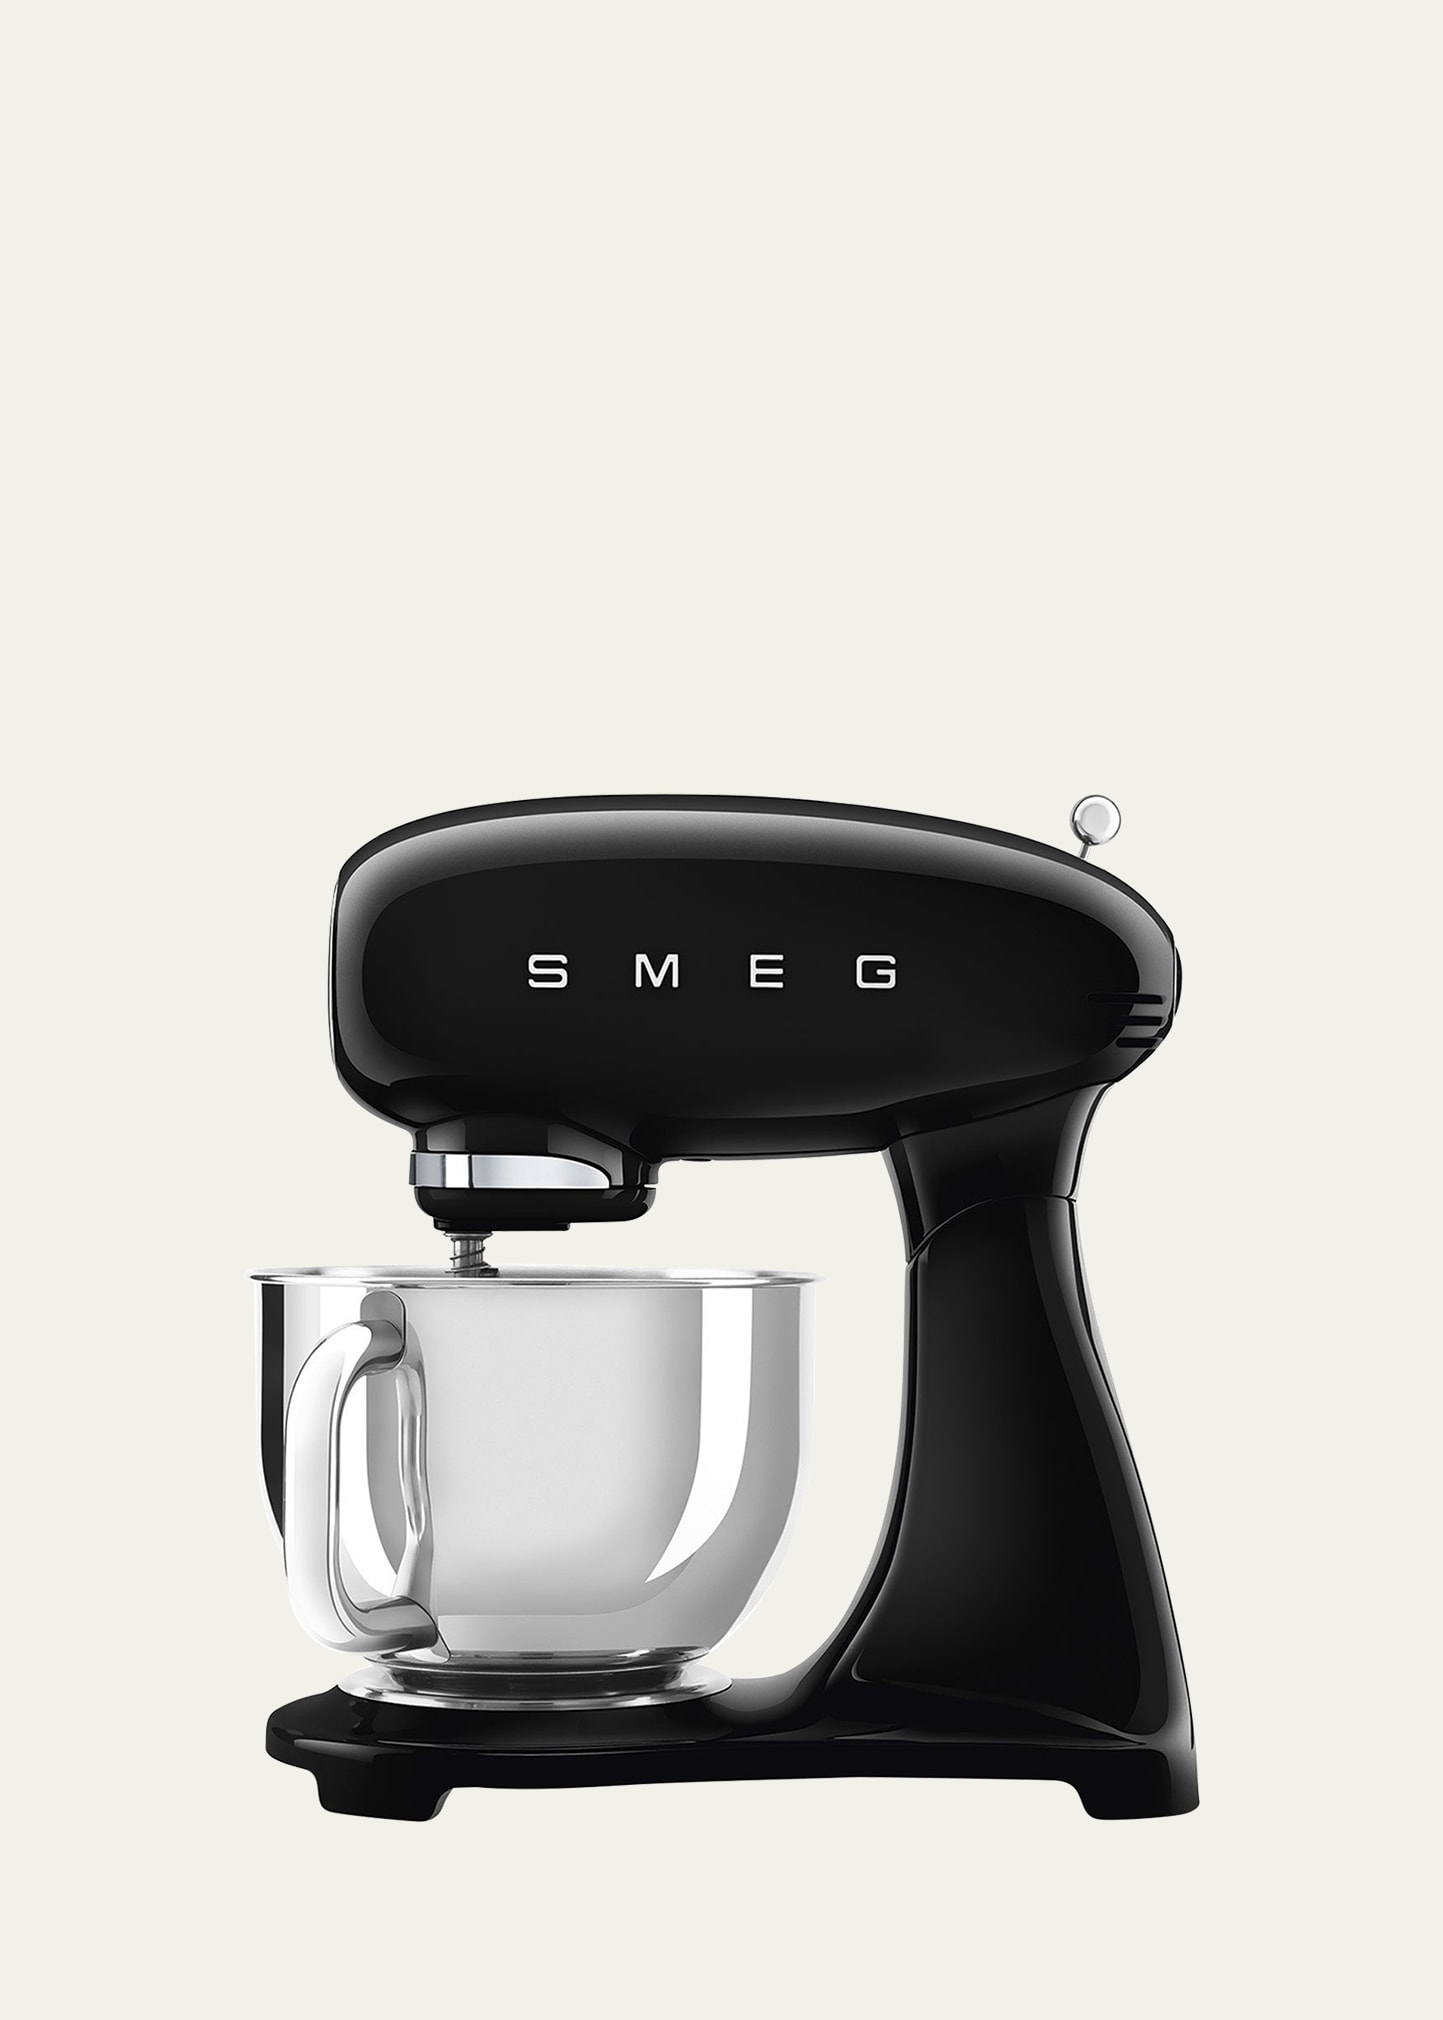 Smeg Full-color Stand Mixer In Black 1